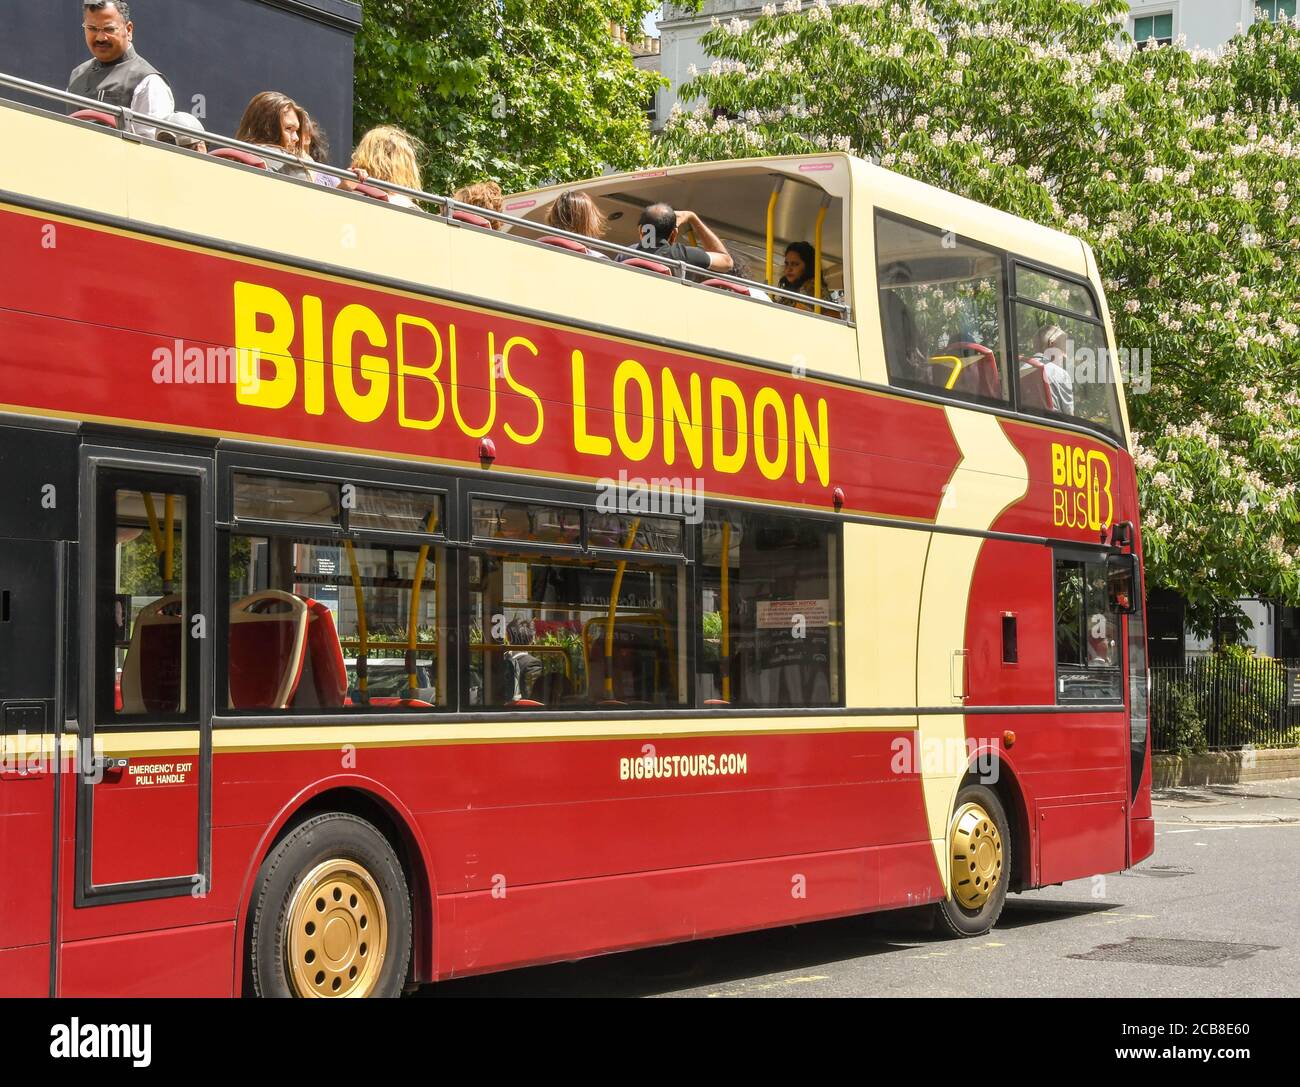 London, England - June 2018: City sightseeing bus operated by BigBus London with tourists on the upper deck. Stock Photo